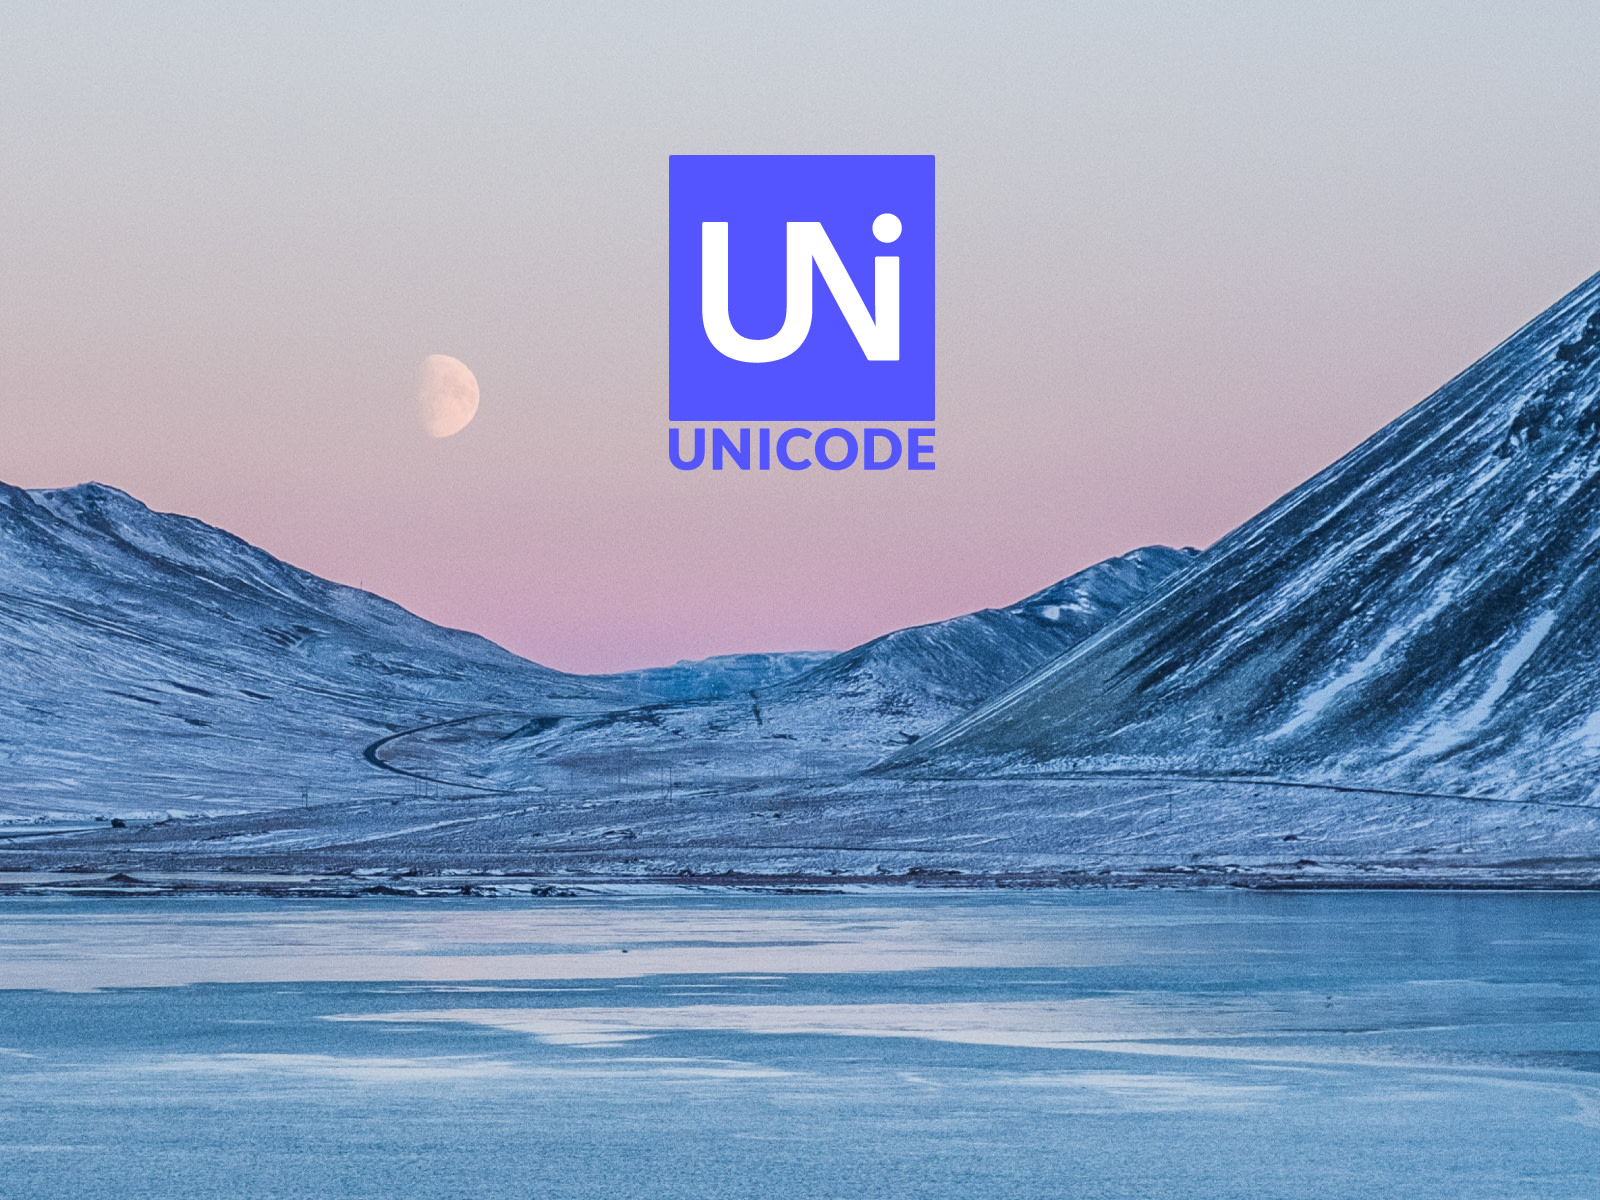 Unicode logo with winter landscape of a frozen lake and mountains in the background. 